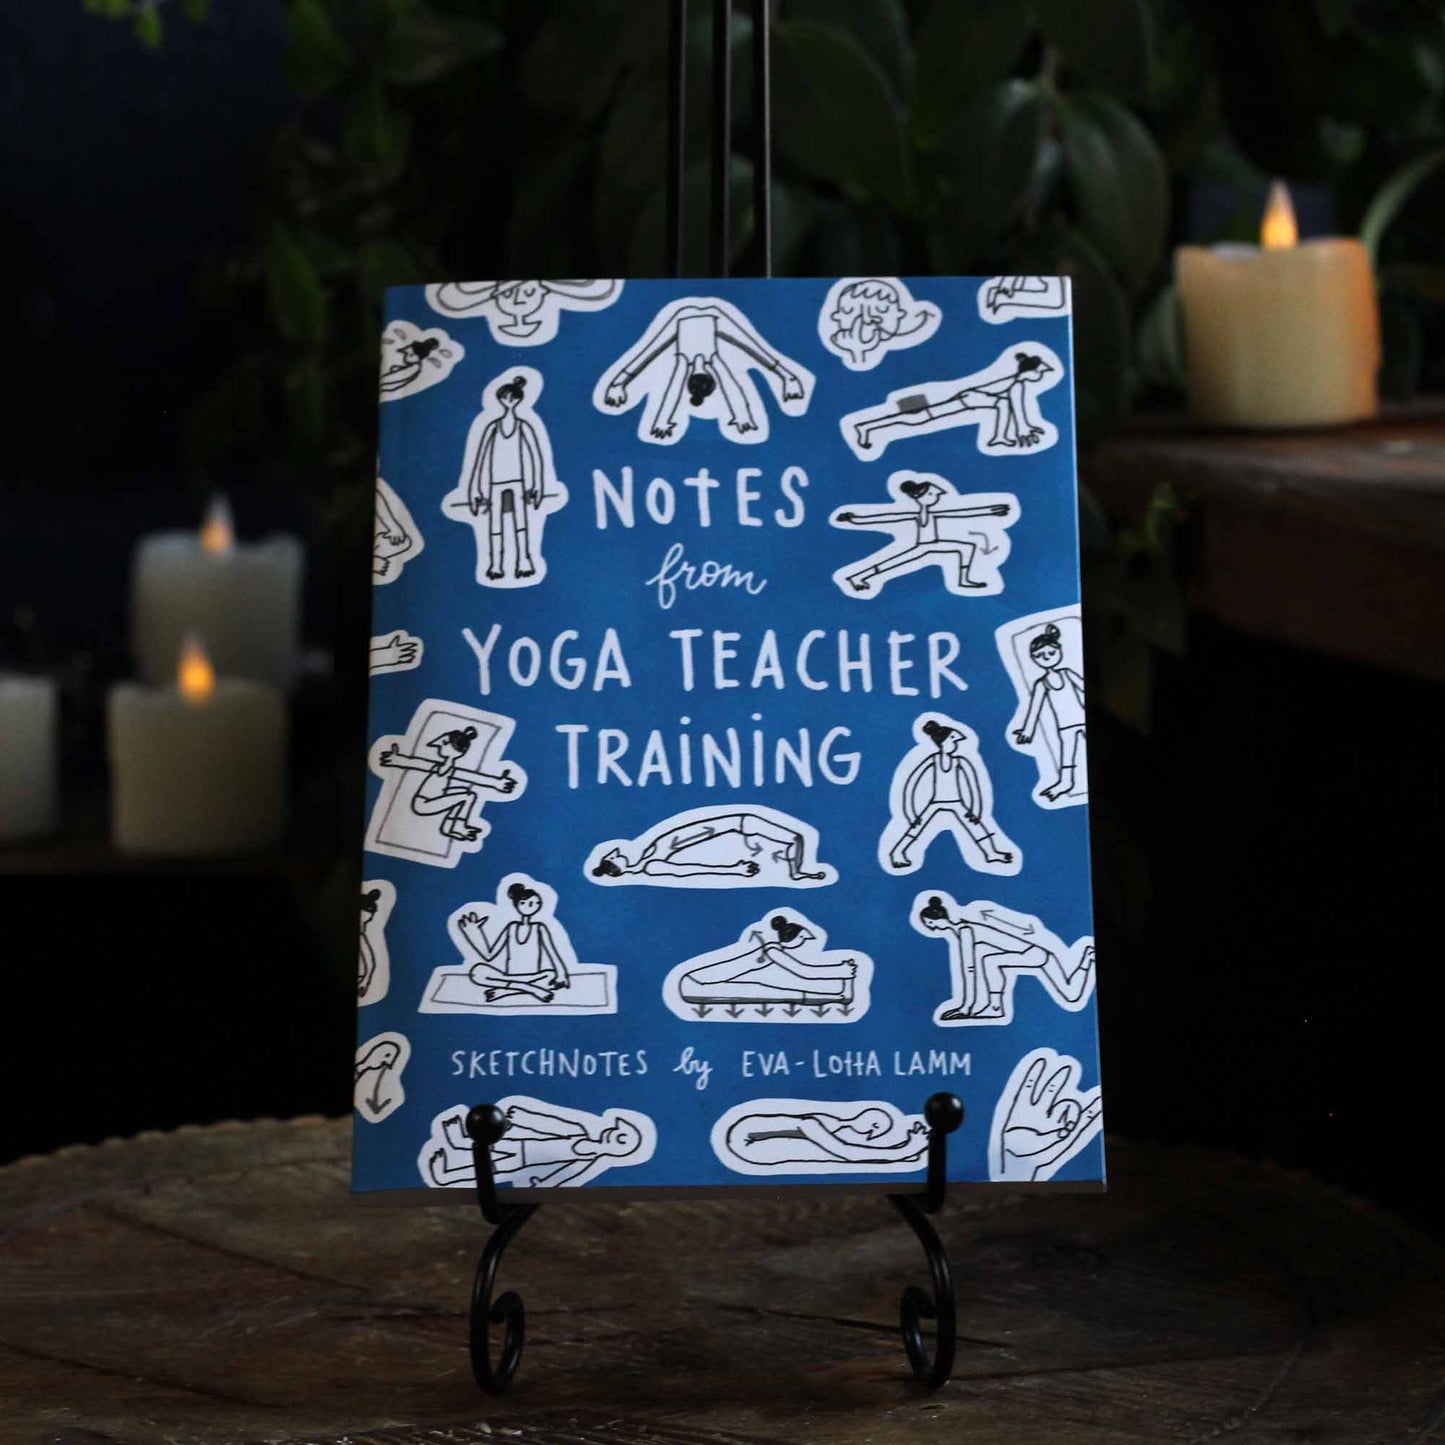 NOTES FROM YOGA TEAHCER TRAINING